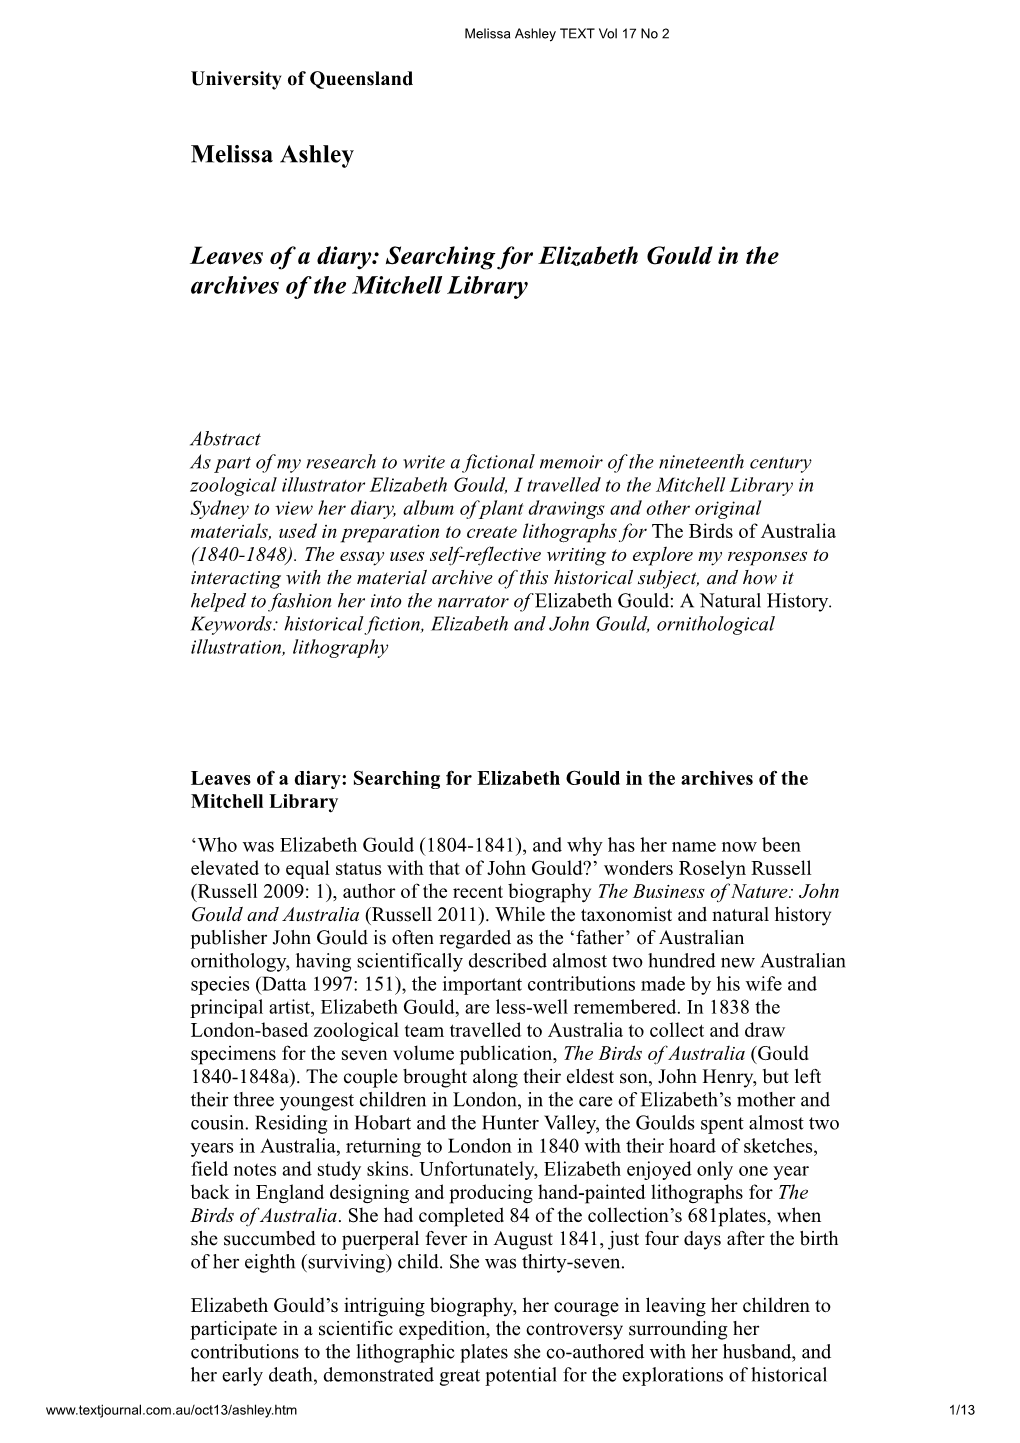 Melissa Ashley Leaves of a Diary: Searching for Elizabeth Gould In